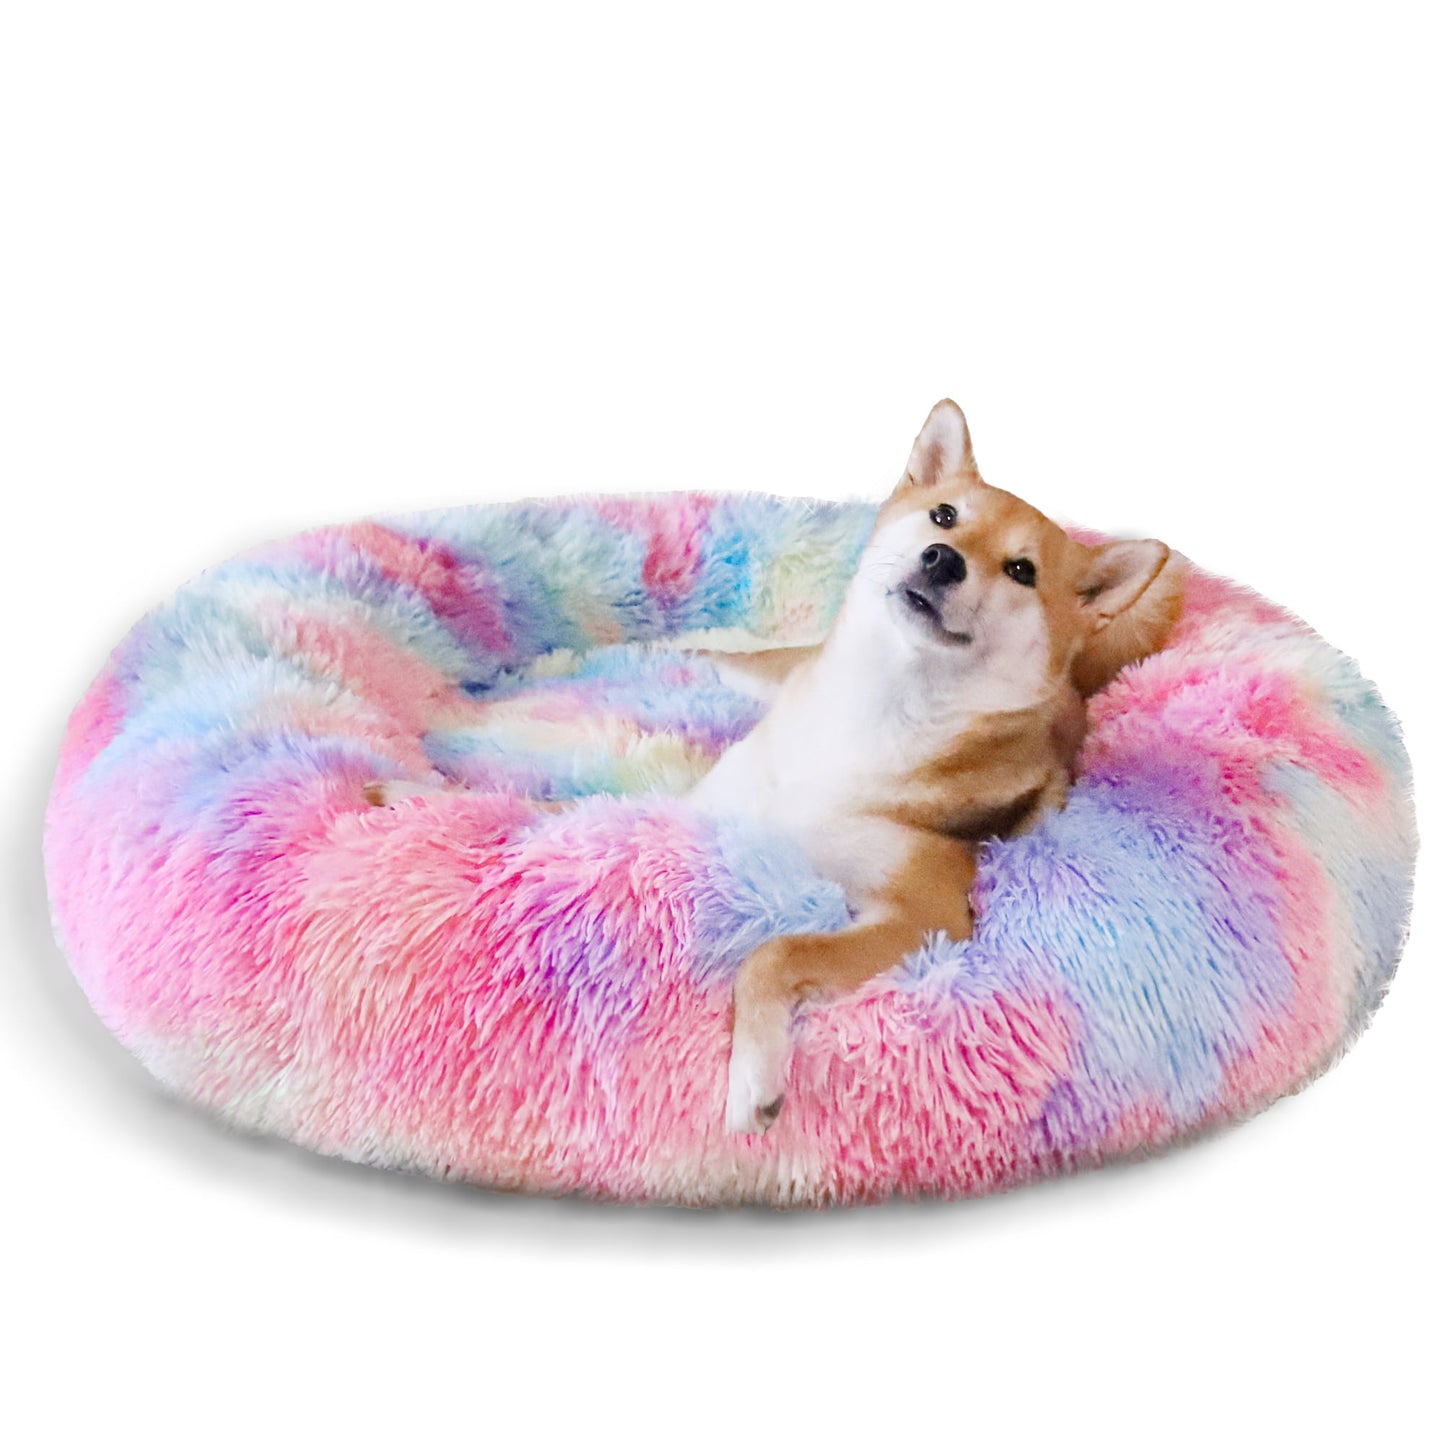 Calming Donut Dog Bed Cat Bed for Small Medium Large Dogs And Cats Anti-Anxiety Plush Soft and Cozy Cat Bed Warming Pet Bed for Winter and Fall (20IN, Mixed Rainbow)